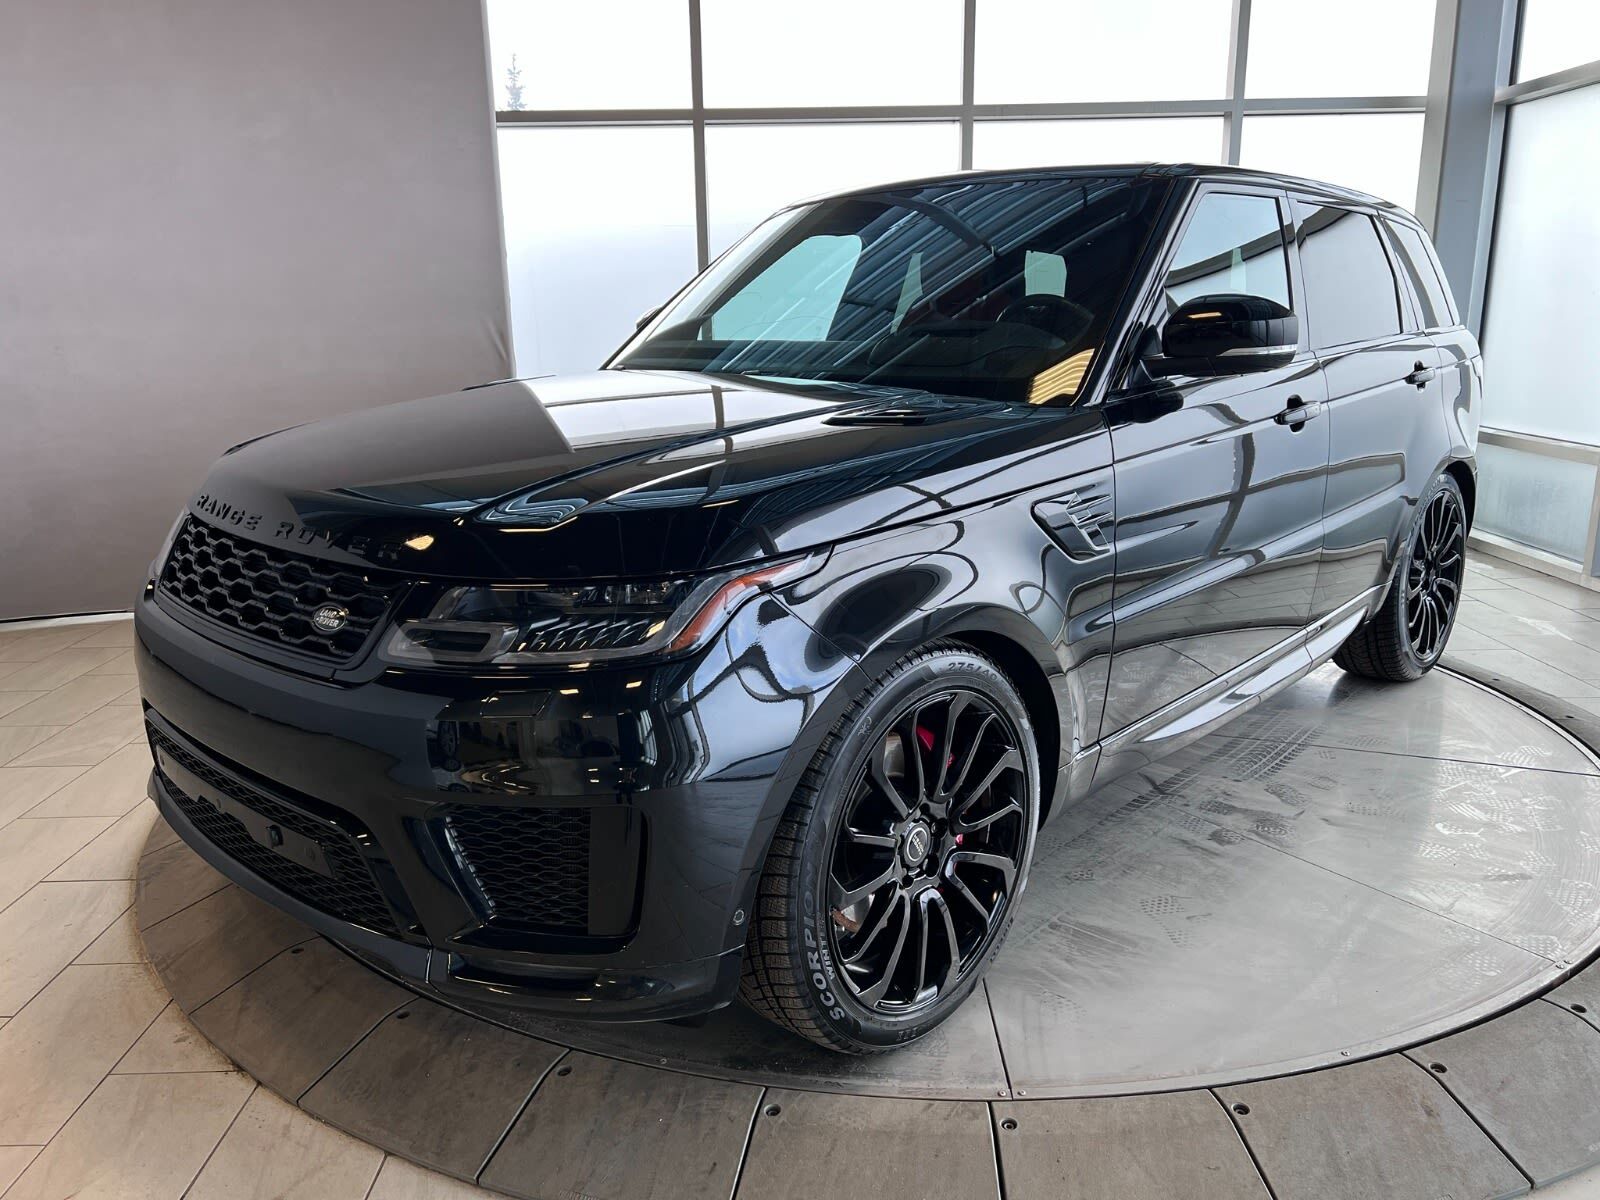 2020 Land Rover Range Rover Sport Autobiography Dynamic